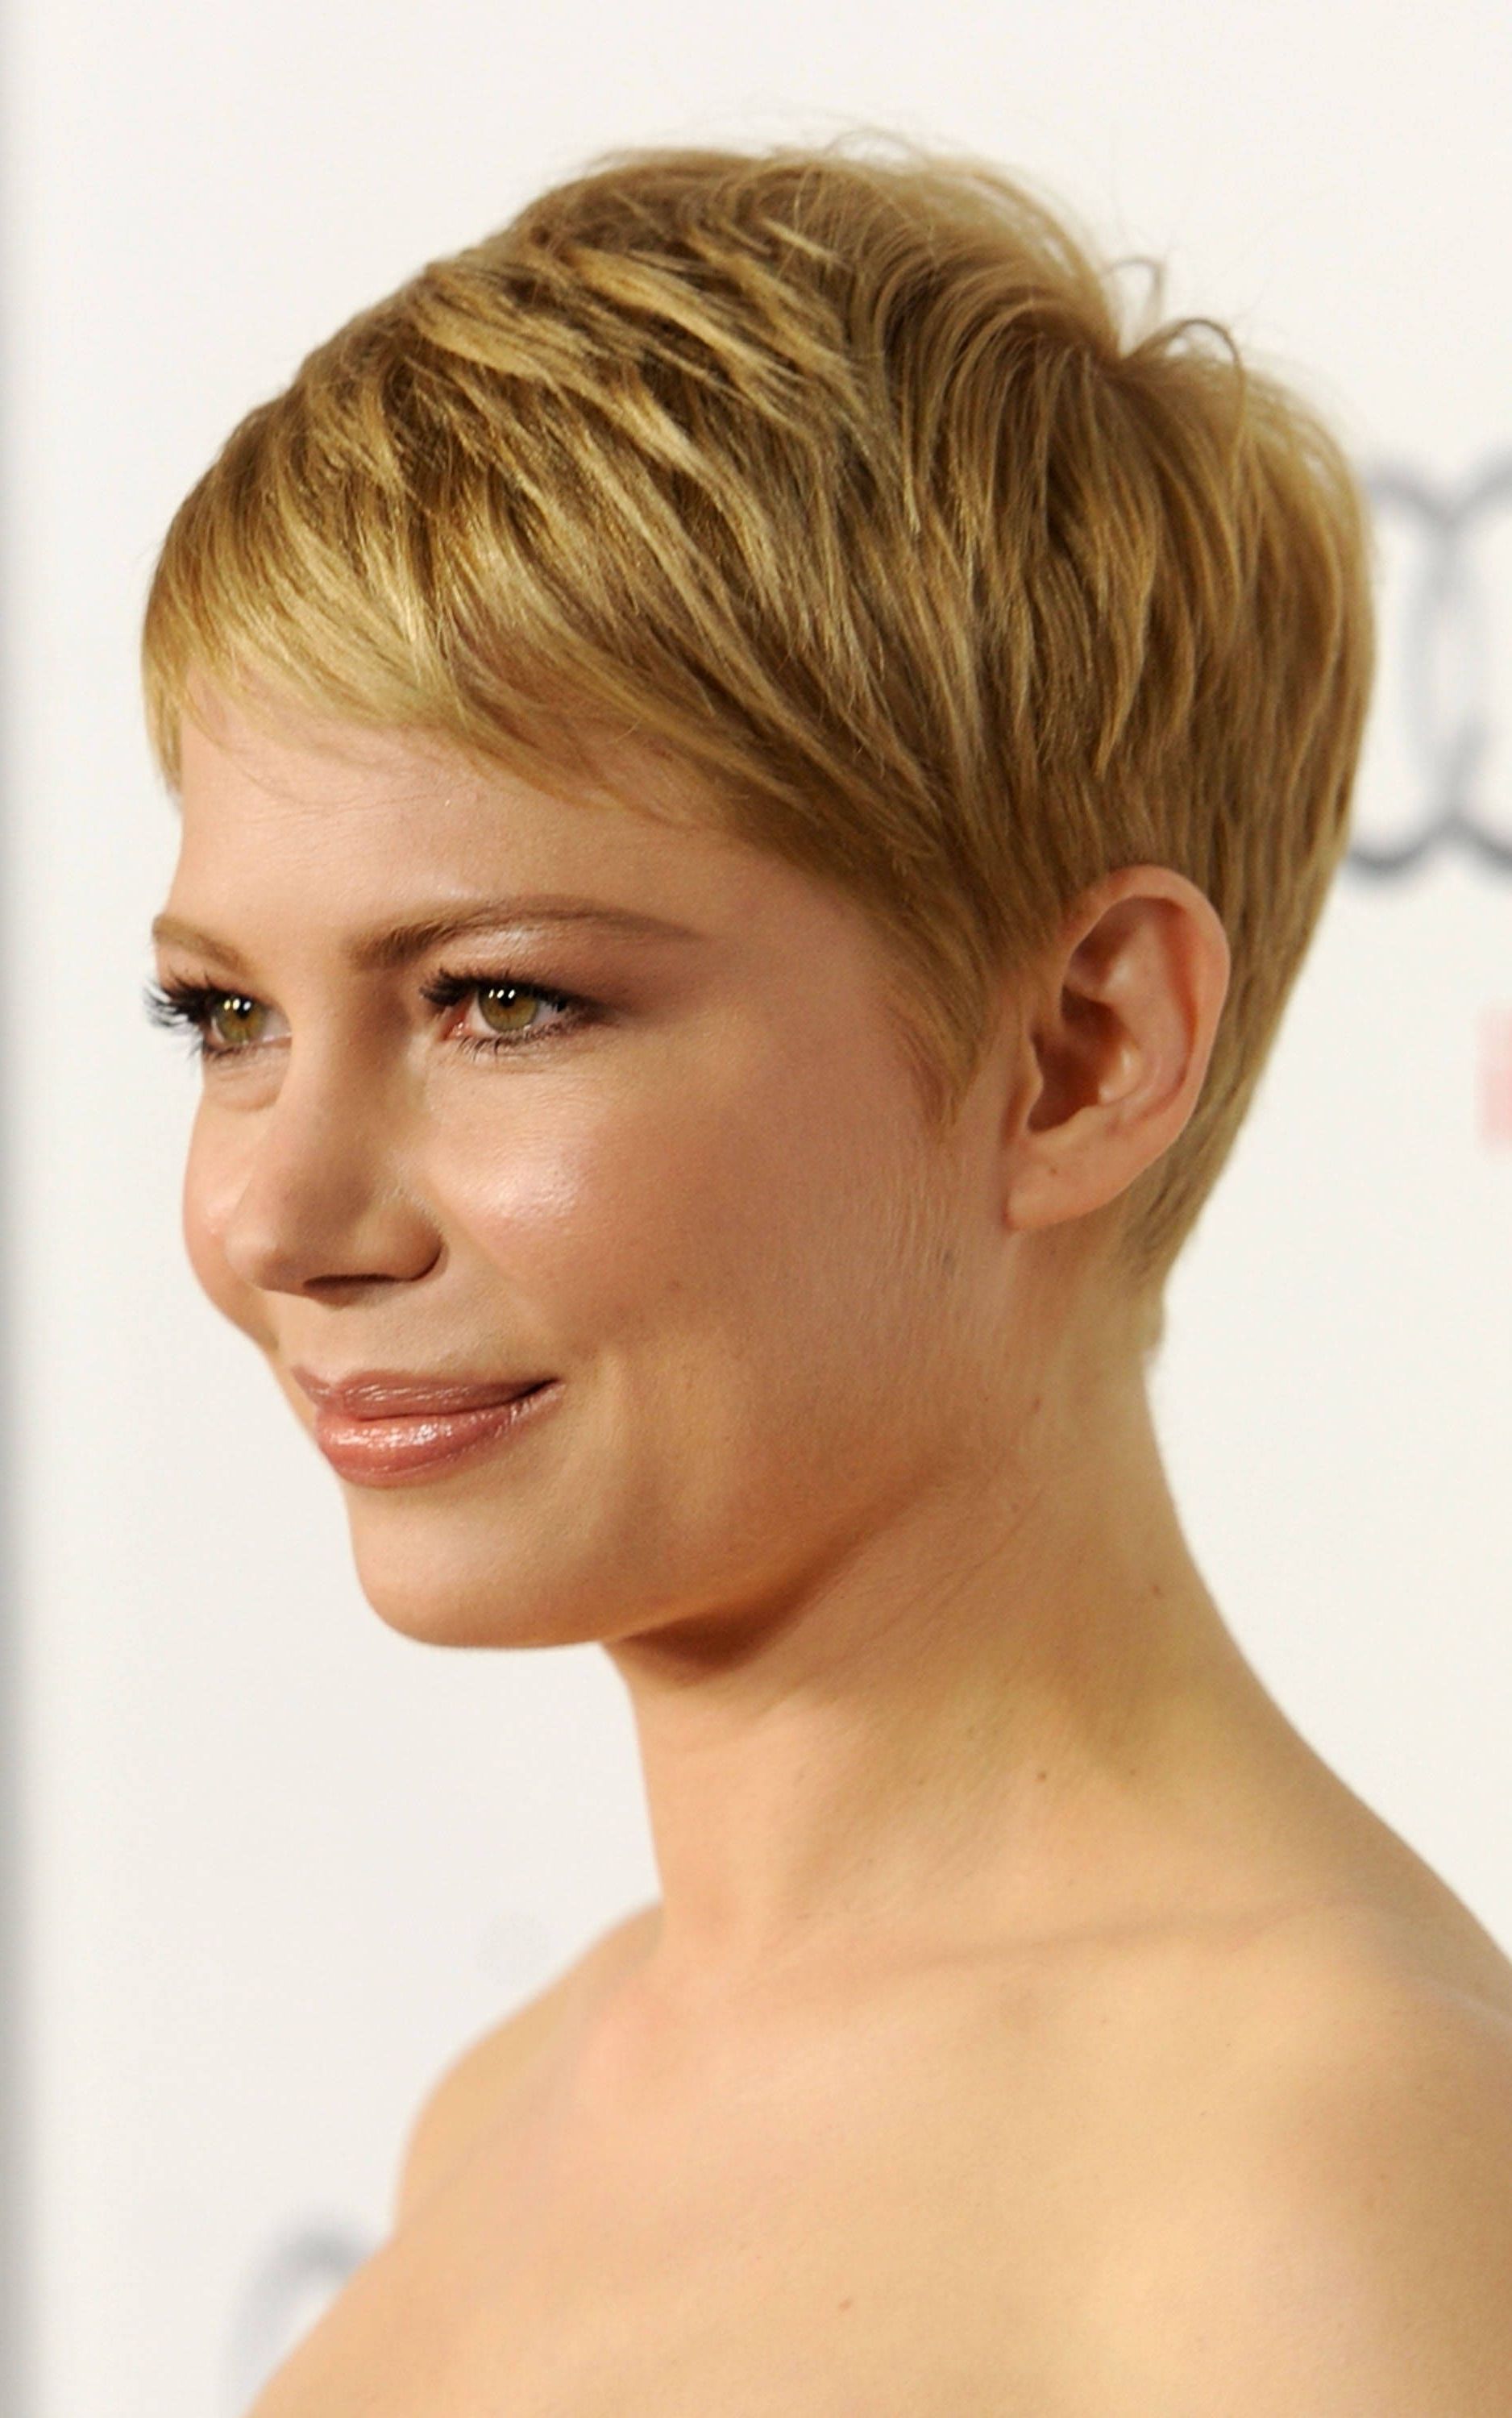 30 Trendy Pixie Hairstyles: Women Short Hair Cuts | Pixie Hair Inside Newest Celebrities Pixie Hairstyles (View 13 of 15)